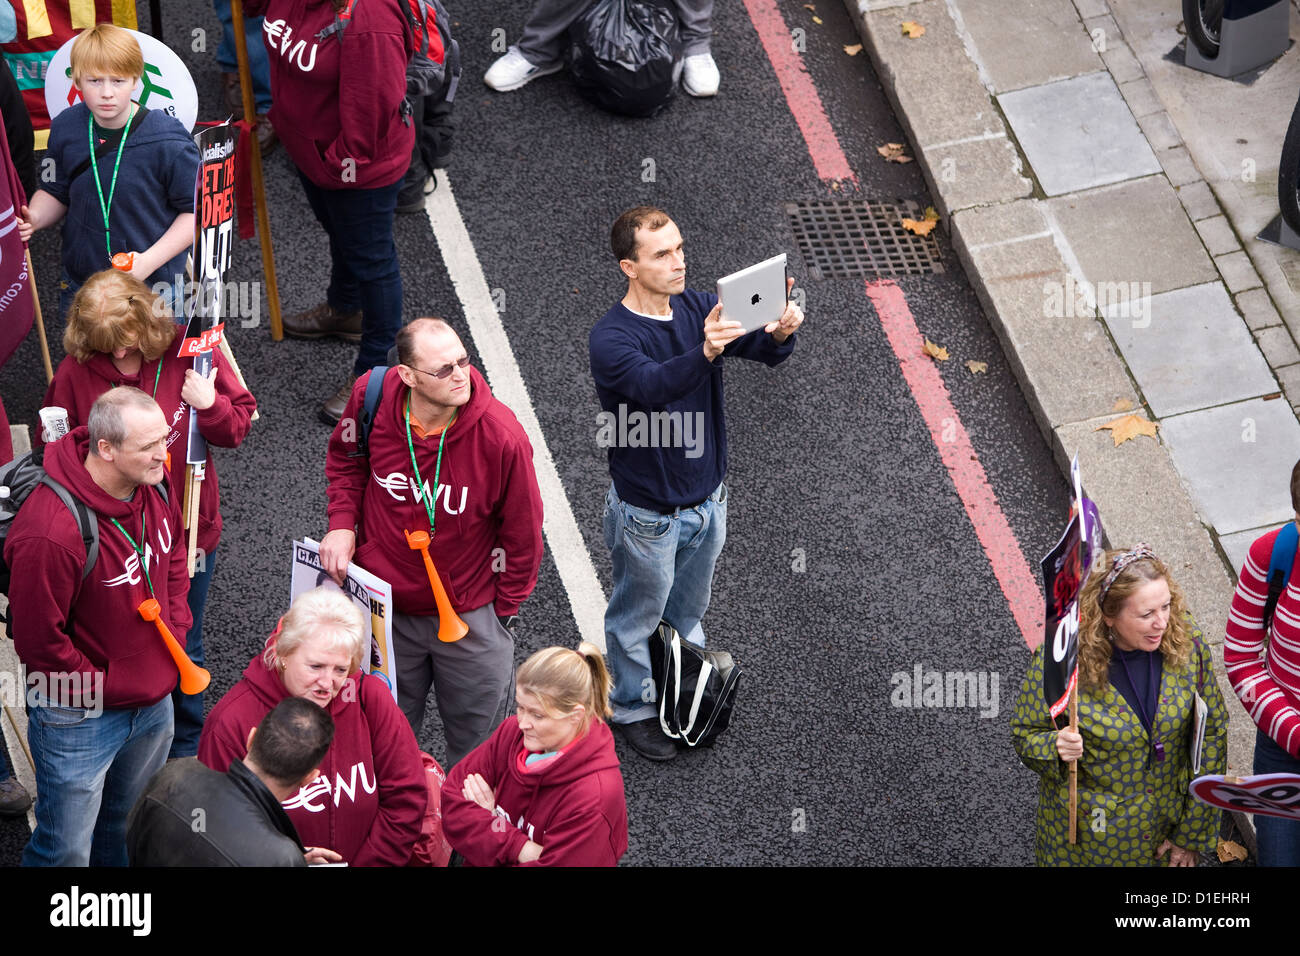 Marcher / protestor / photographer taking a photo / photograph / snap with an iPad / i Pad during a union march in London, UK. Stock Photo